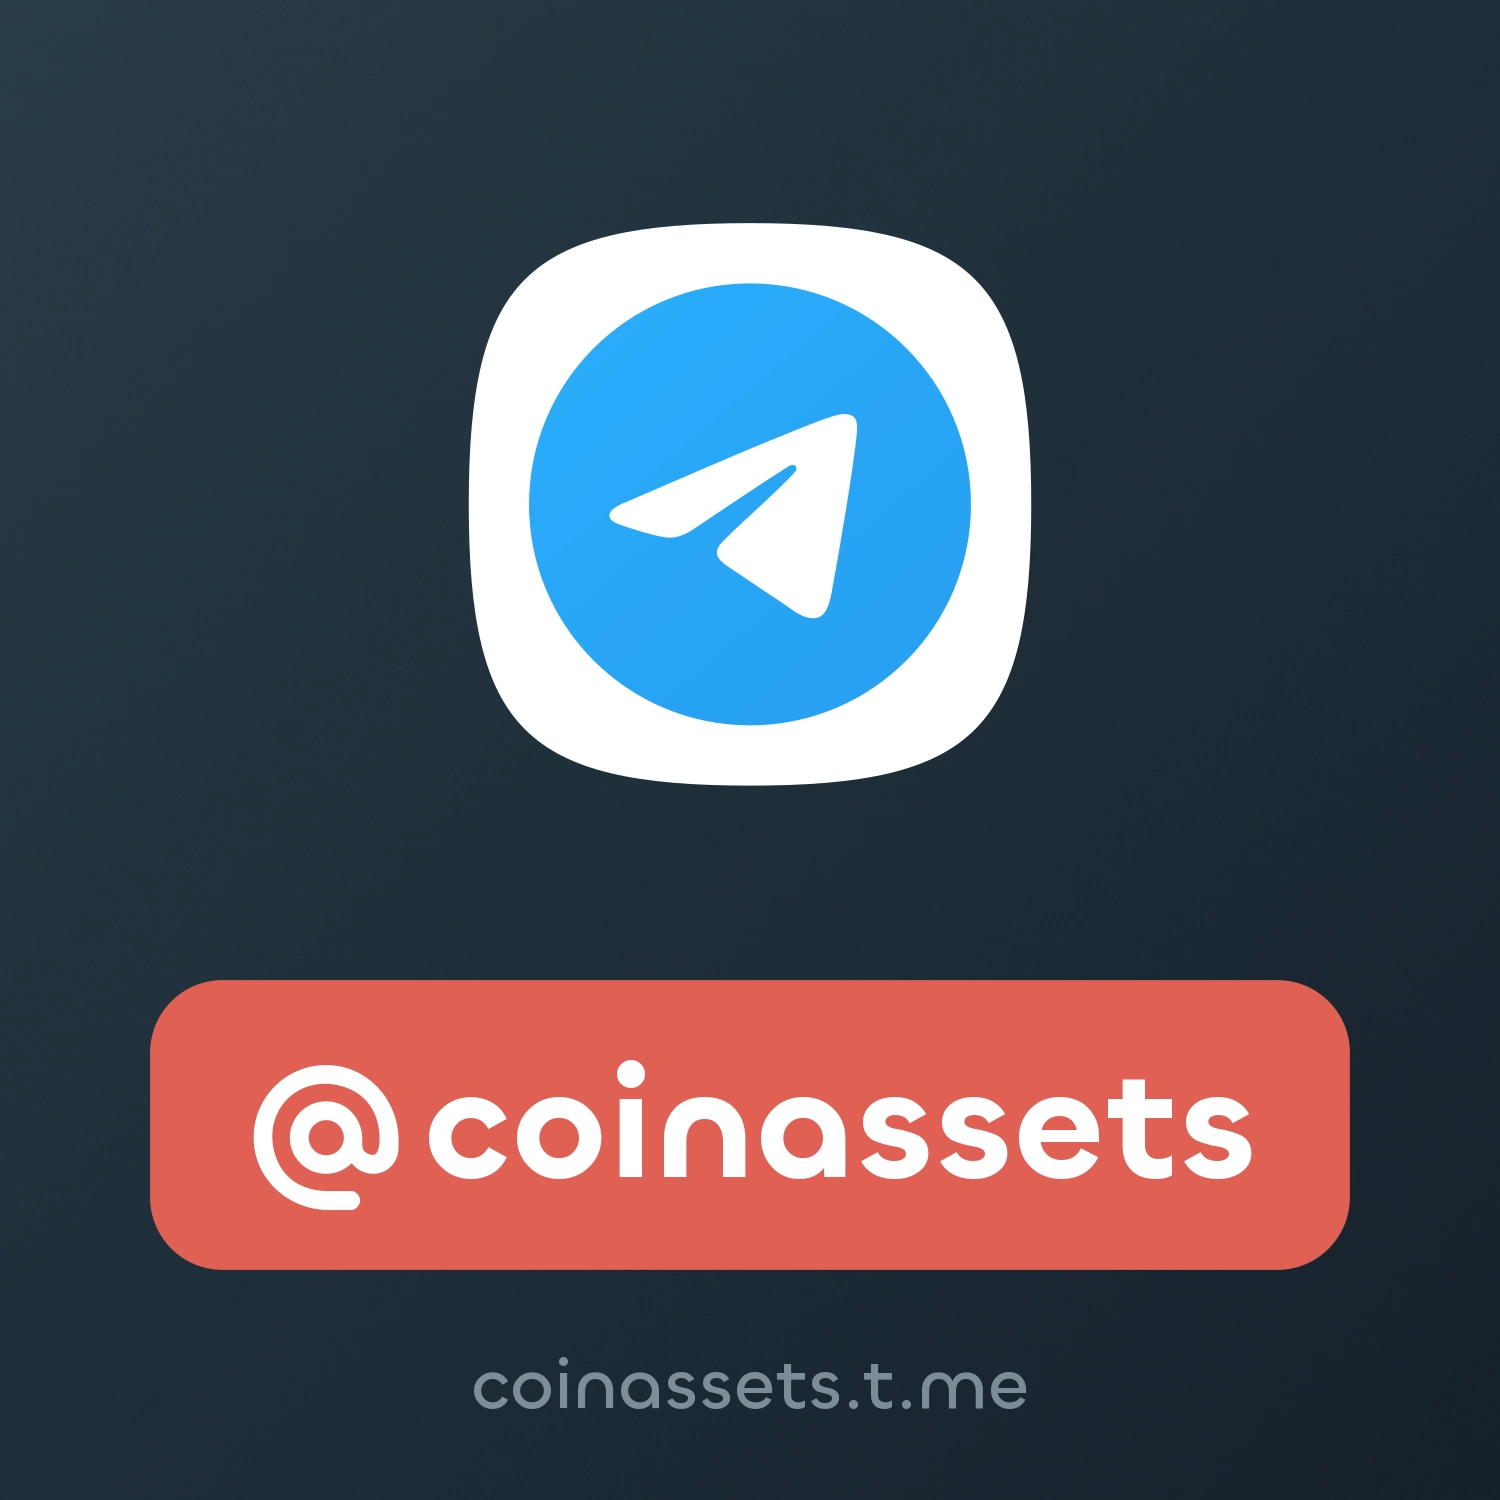 @coinassets